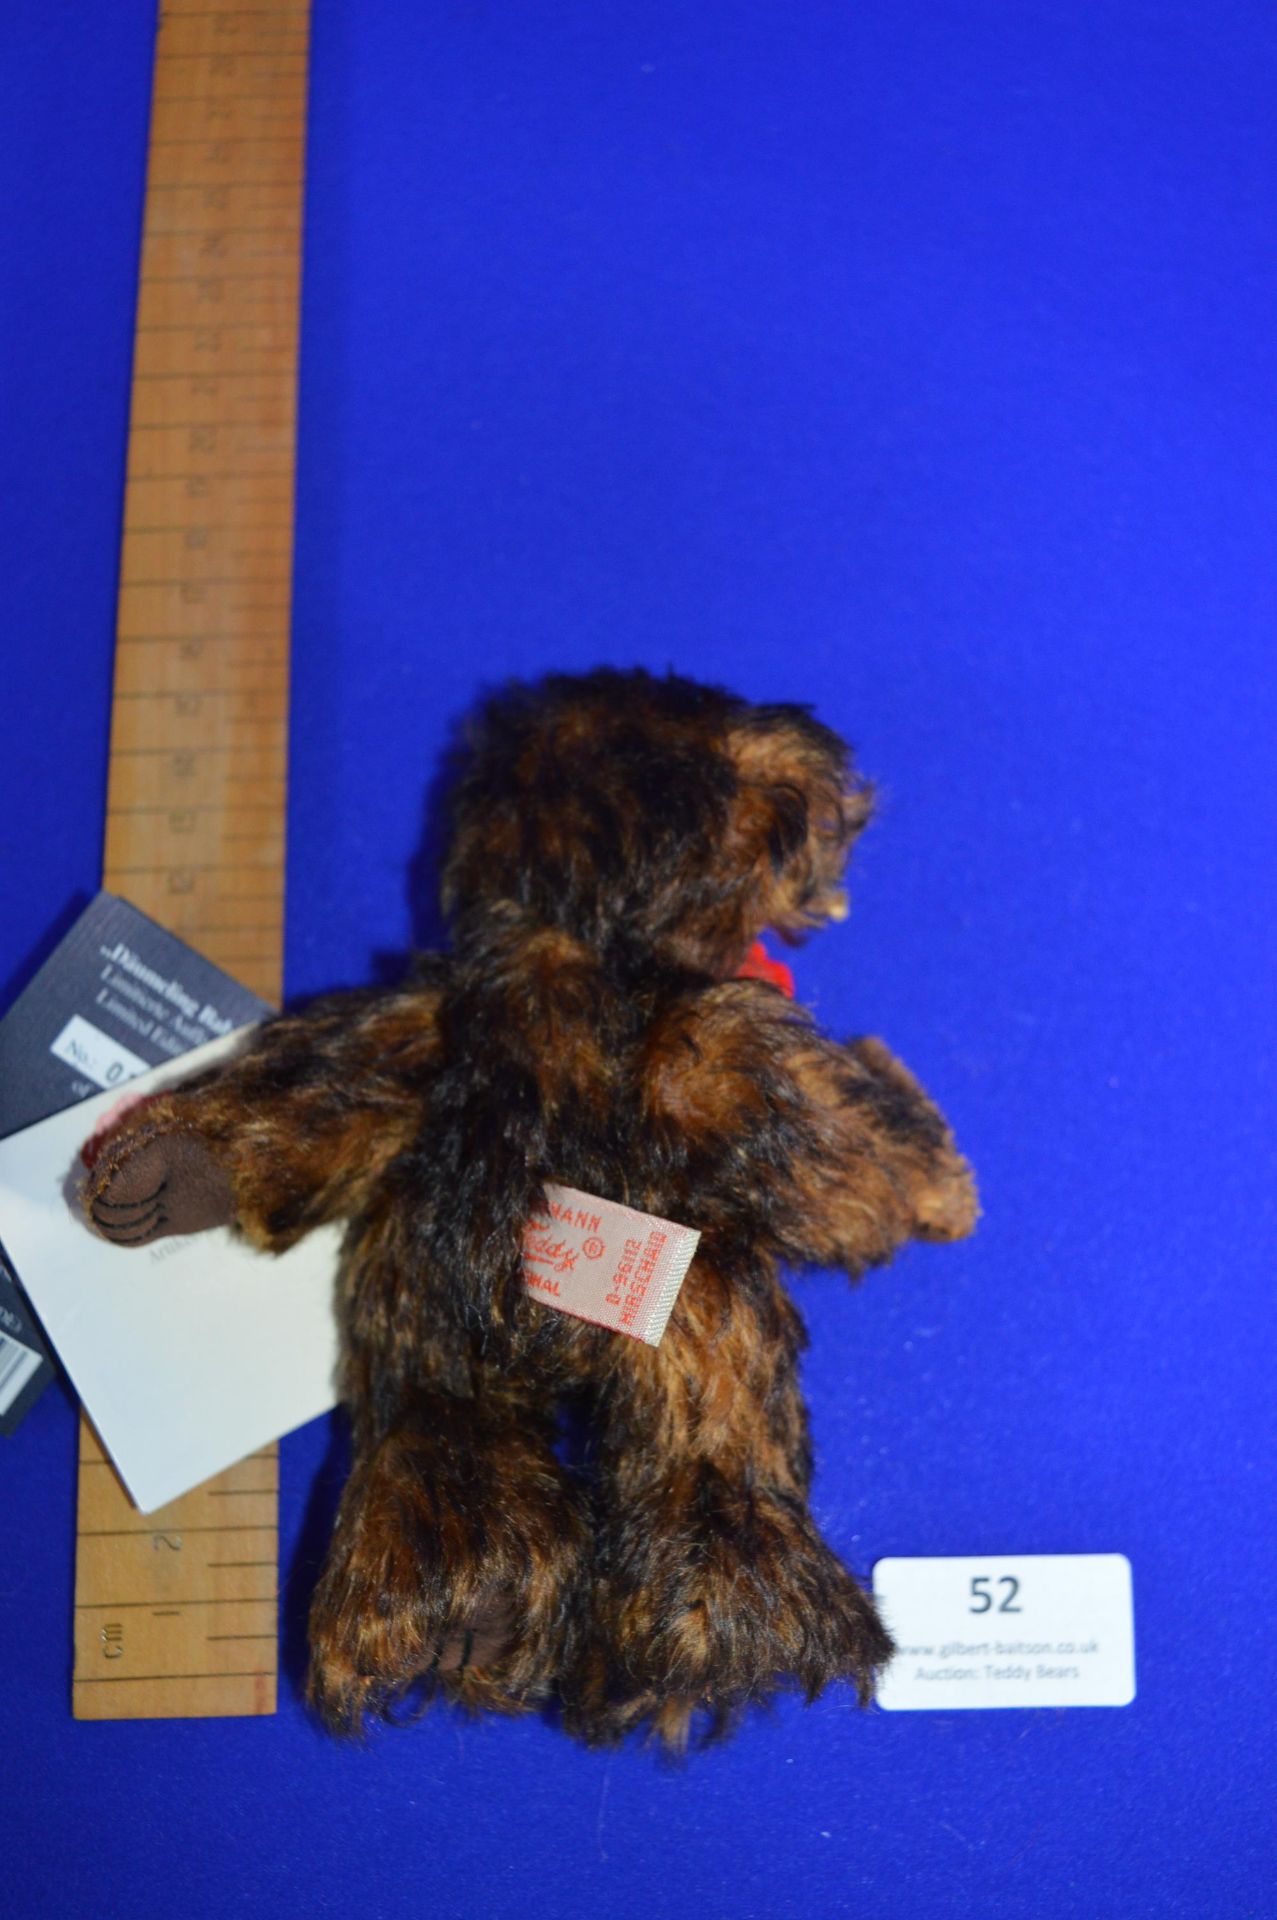 Hermann Limited Edition Teddy Daumeling Babies (14cm) - Image 3 of 3